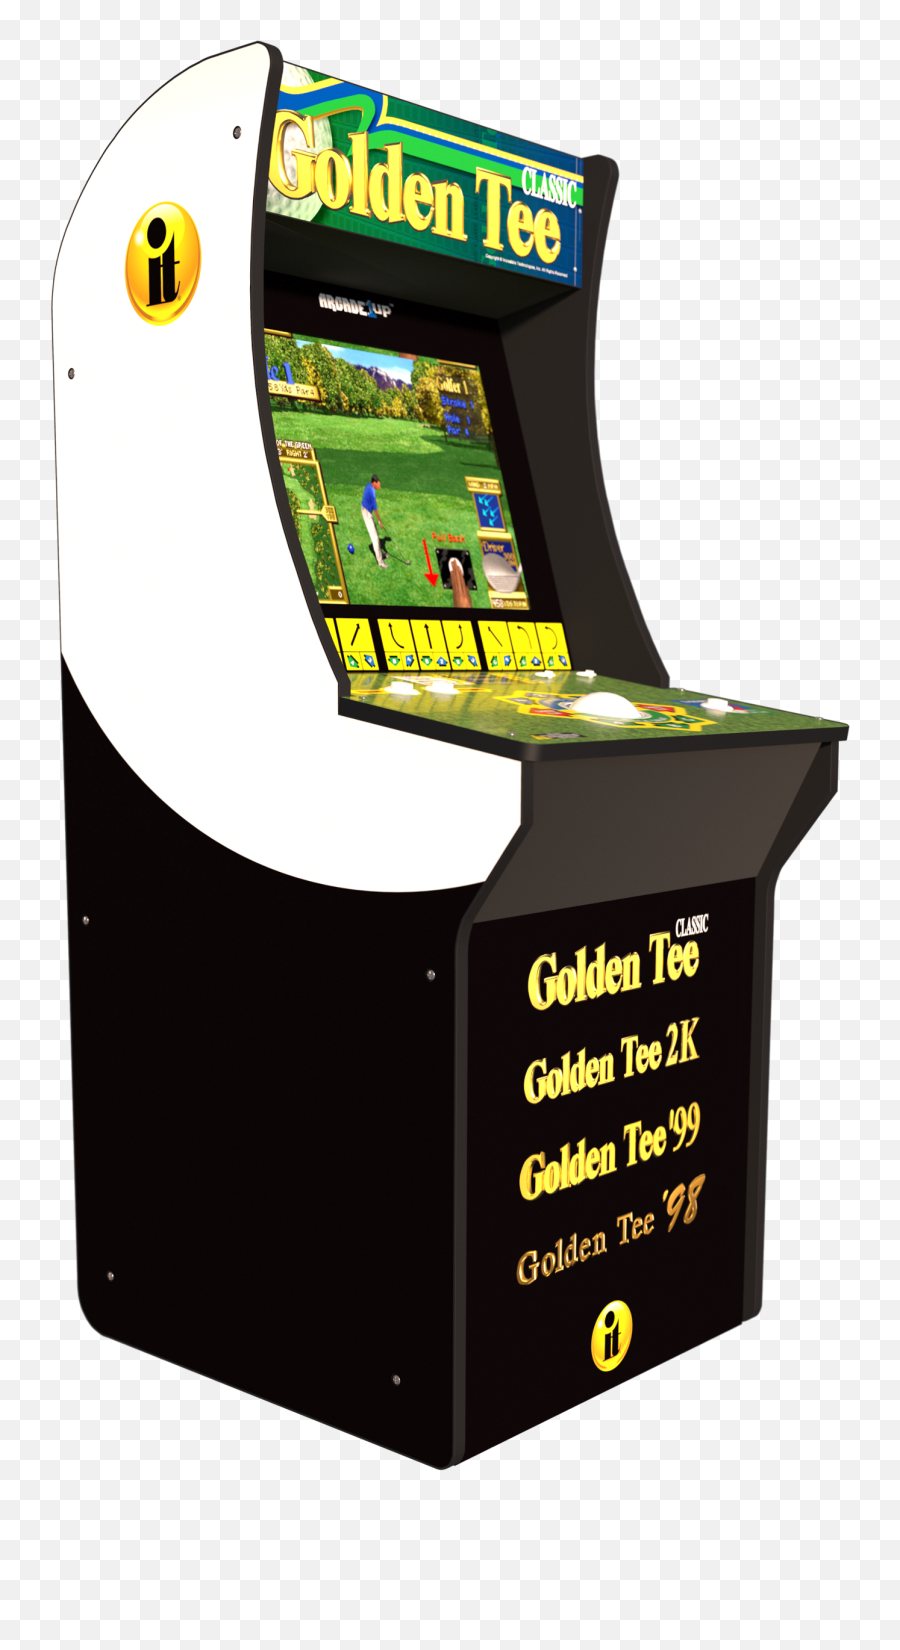 Golden Tee Arcade Machine With Riser Png